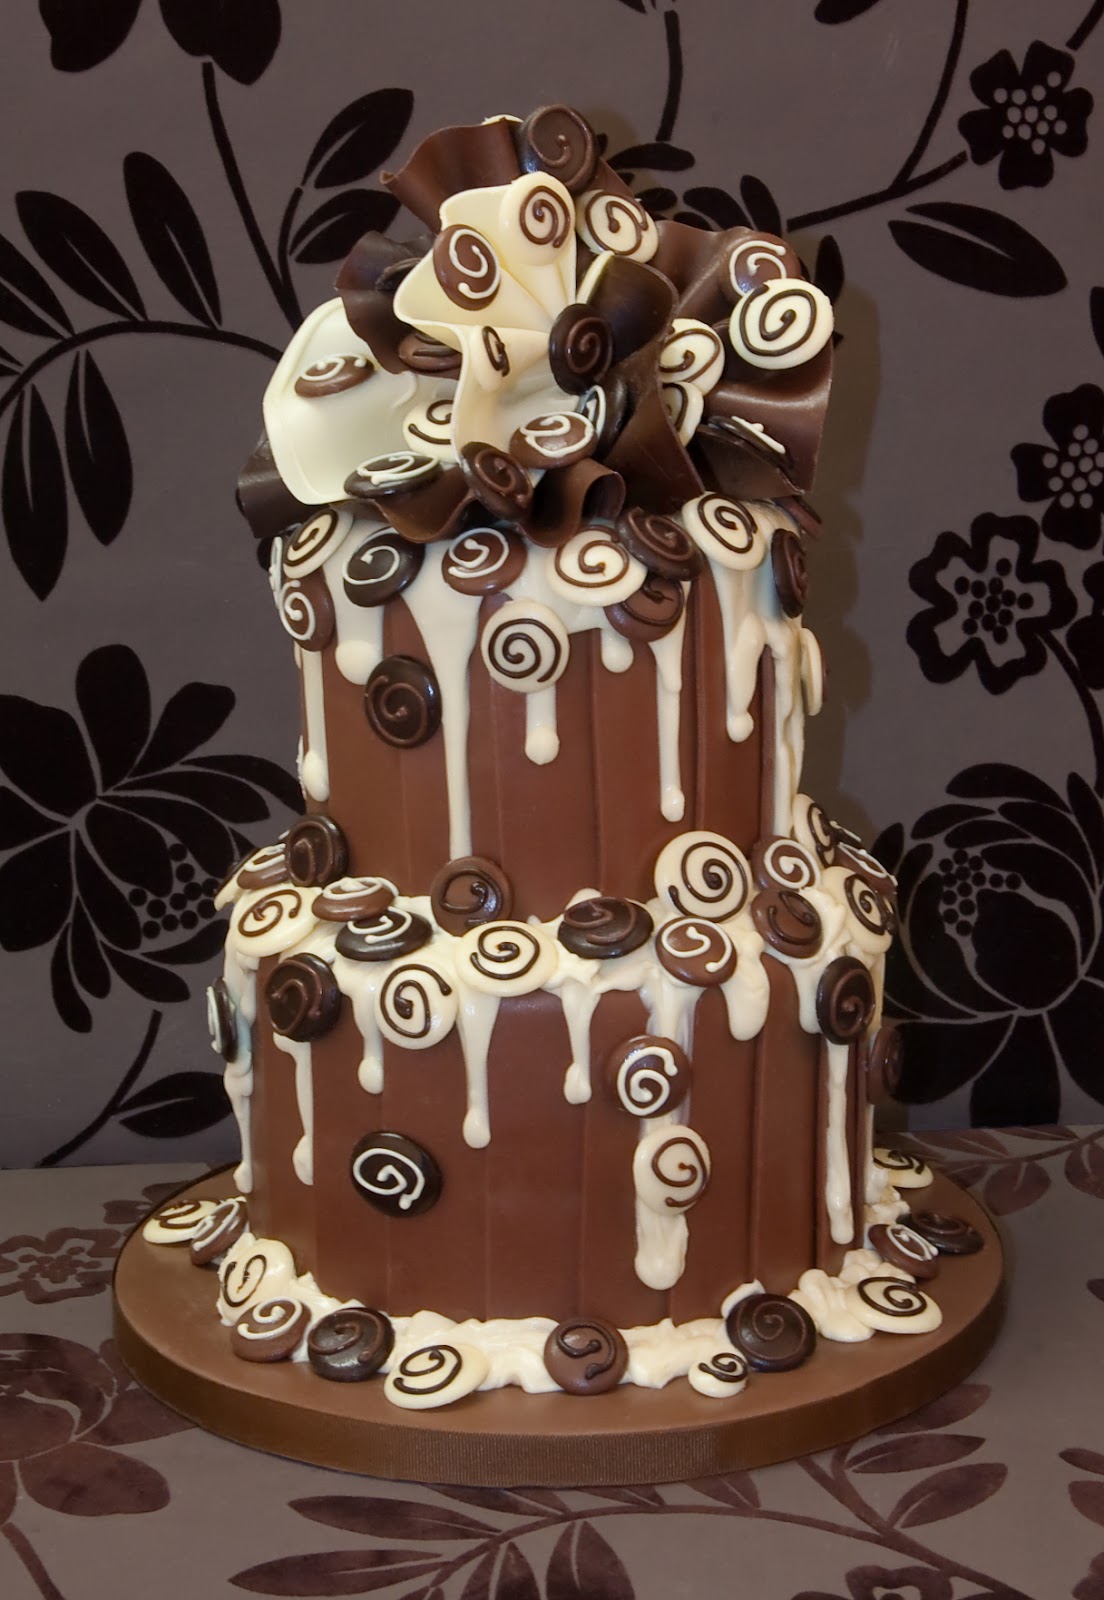 fancy chocolate cake images Posted by Katie Watts at 02:52 No comments: